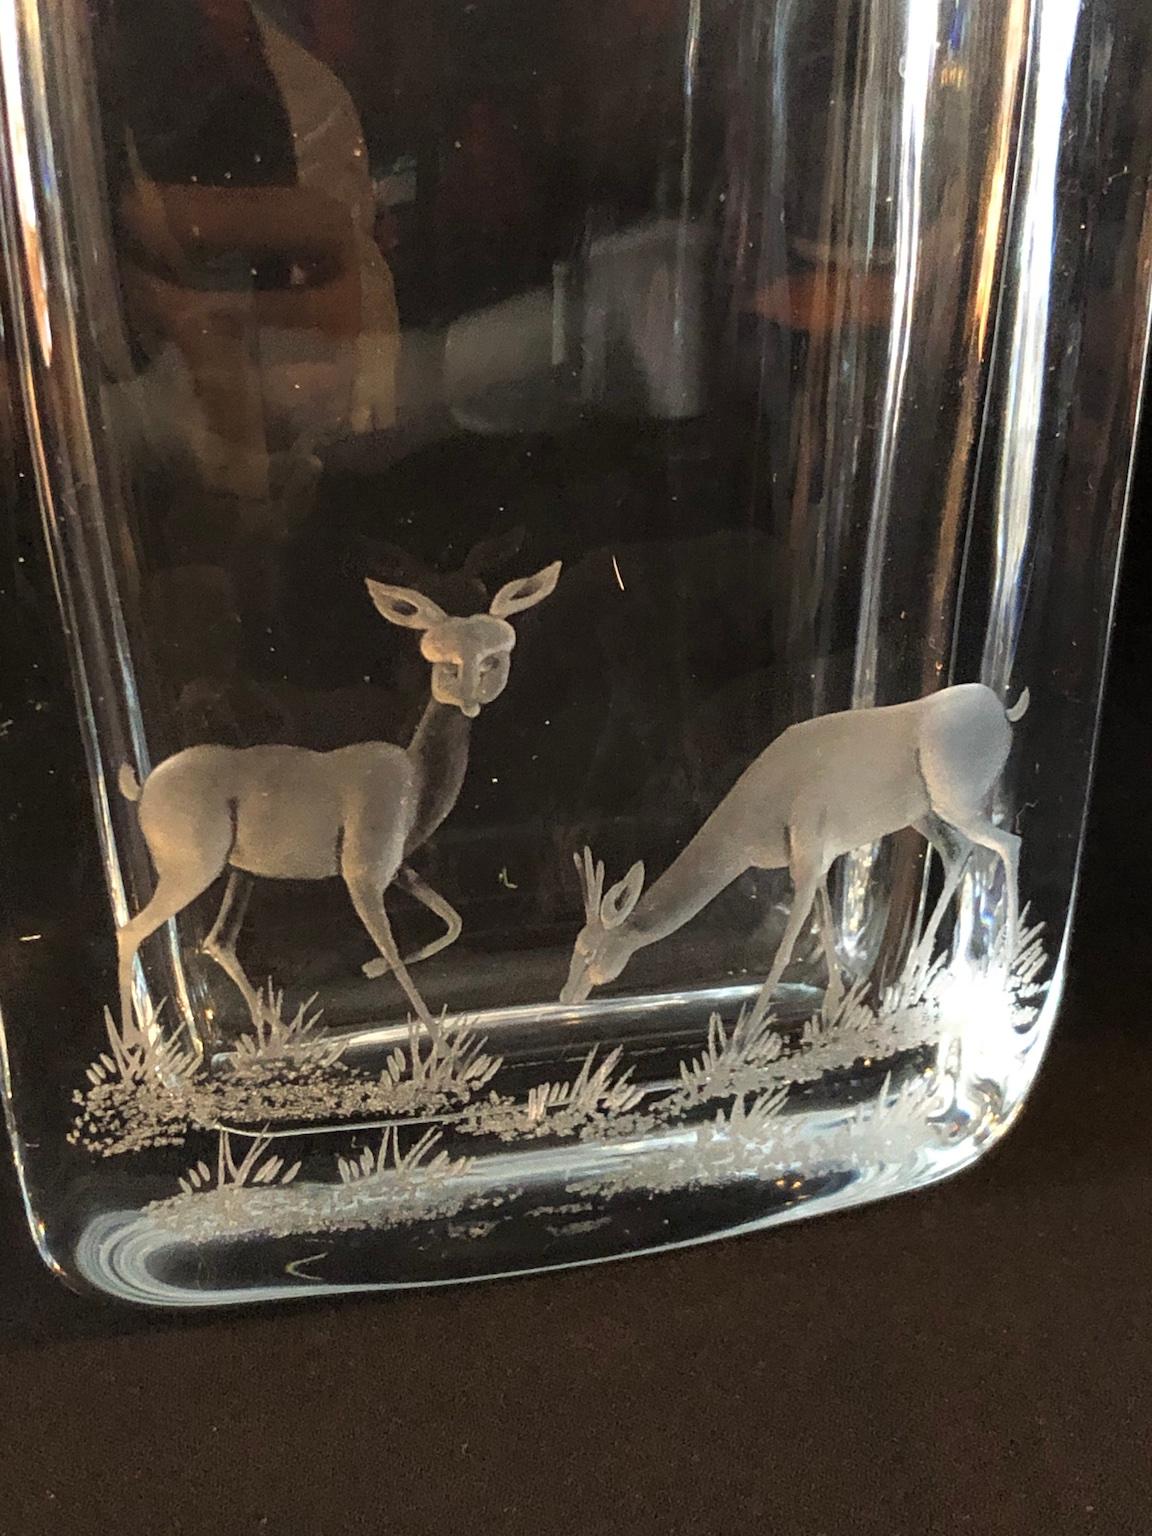 Midcentury Swedish Strombergshyttan art glass vase, etched with pair of Deers, circa 1950

Exquisite Mid-Century Modern Swedish Strombergshyttan art glass vase.
The lozenge shaped vase, with thick glass walls is acid etched on one side
Depicting a